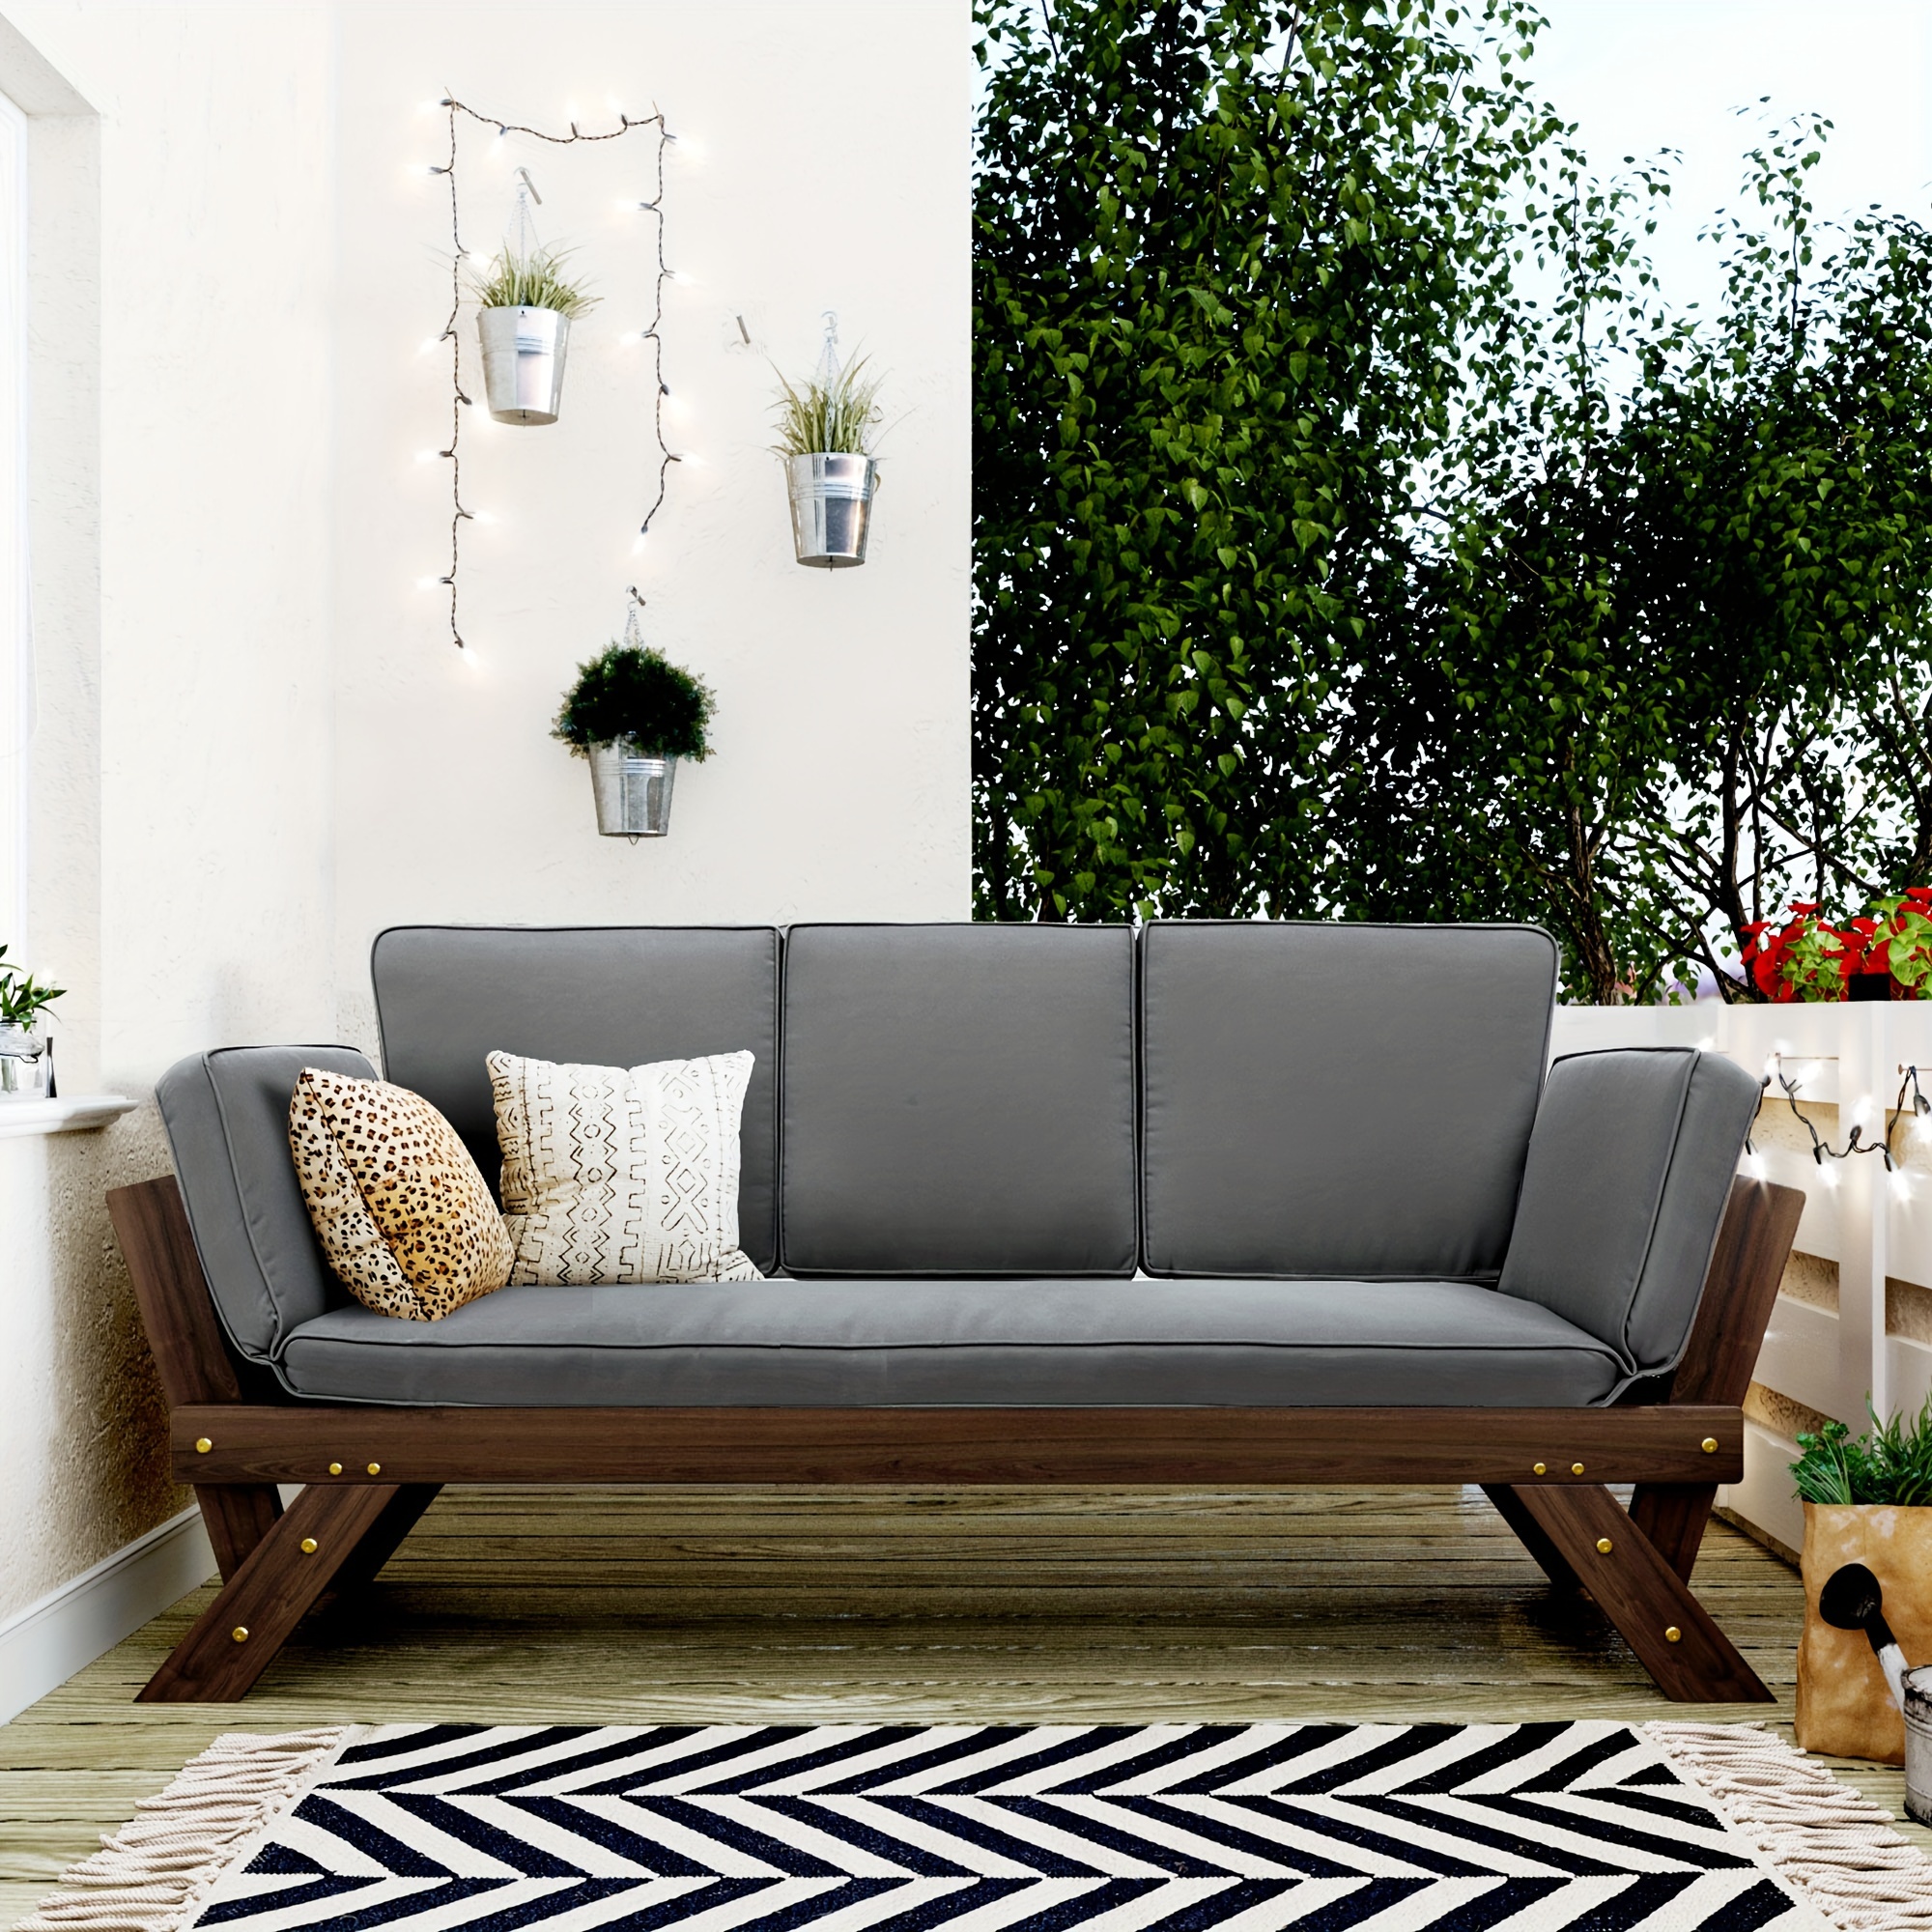 

Merax Adjustable Wooden Patio Daybed Sofa Chaise Lounge With Cushions, Perfect For Small Spaces